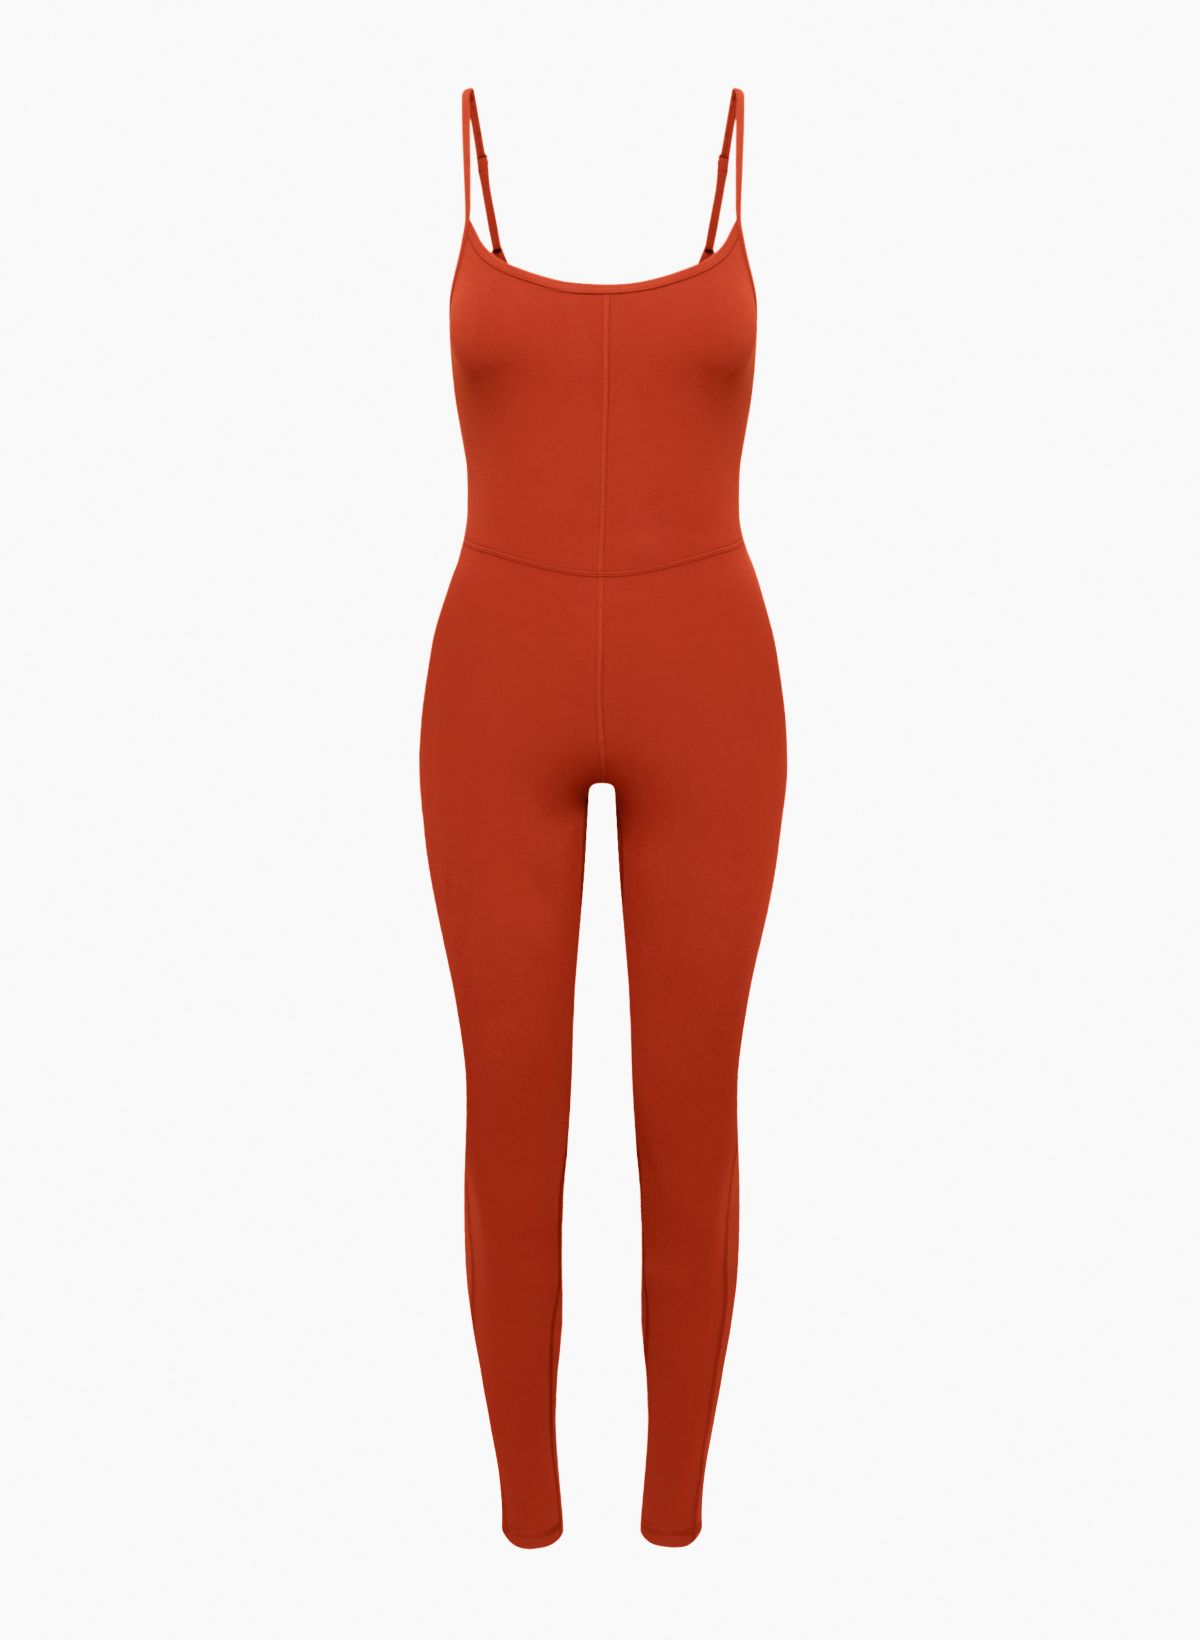 Do yourself a favor and purchase the @Aritzia jumpsuit. #aritzia #arit